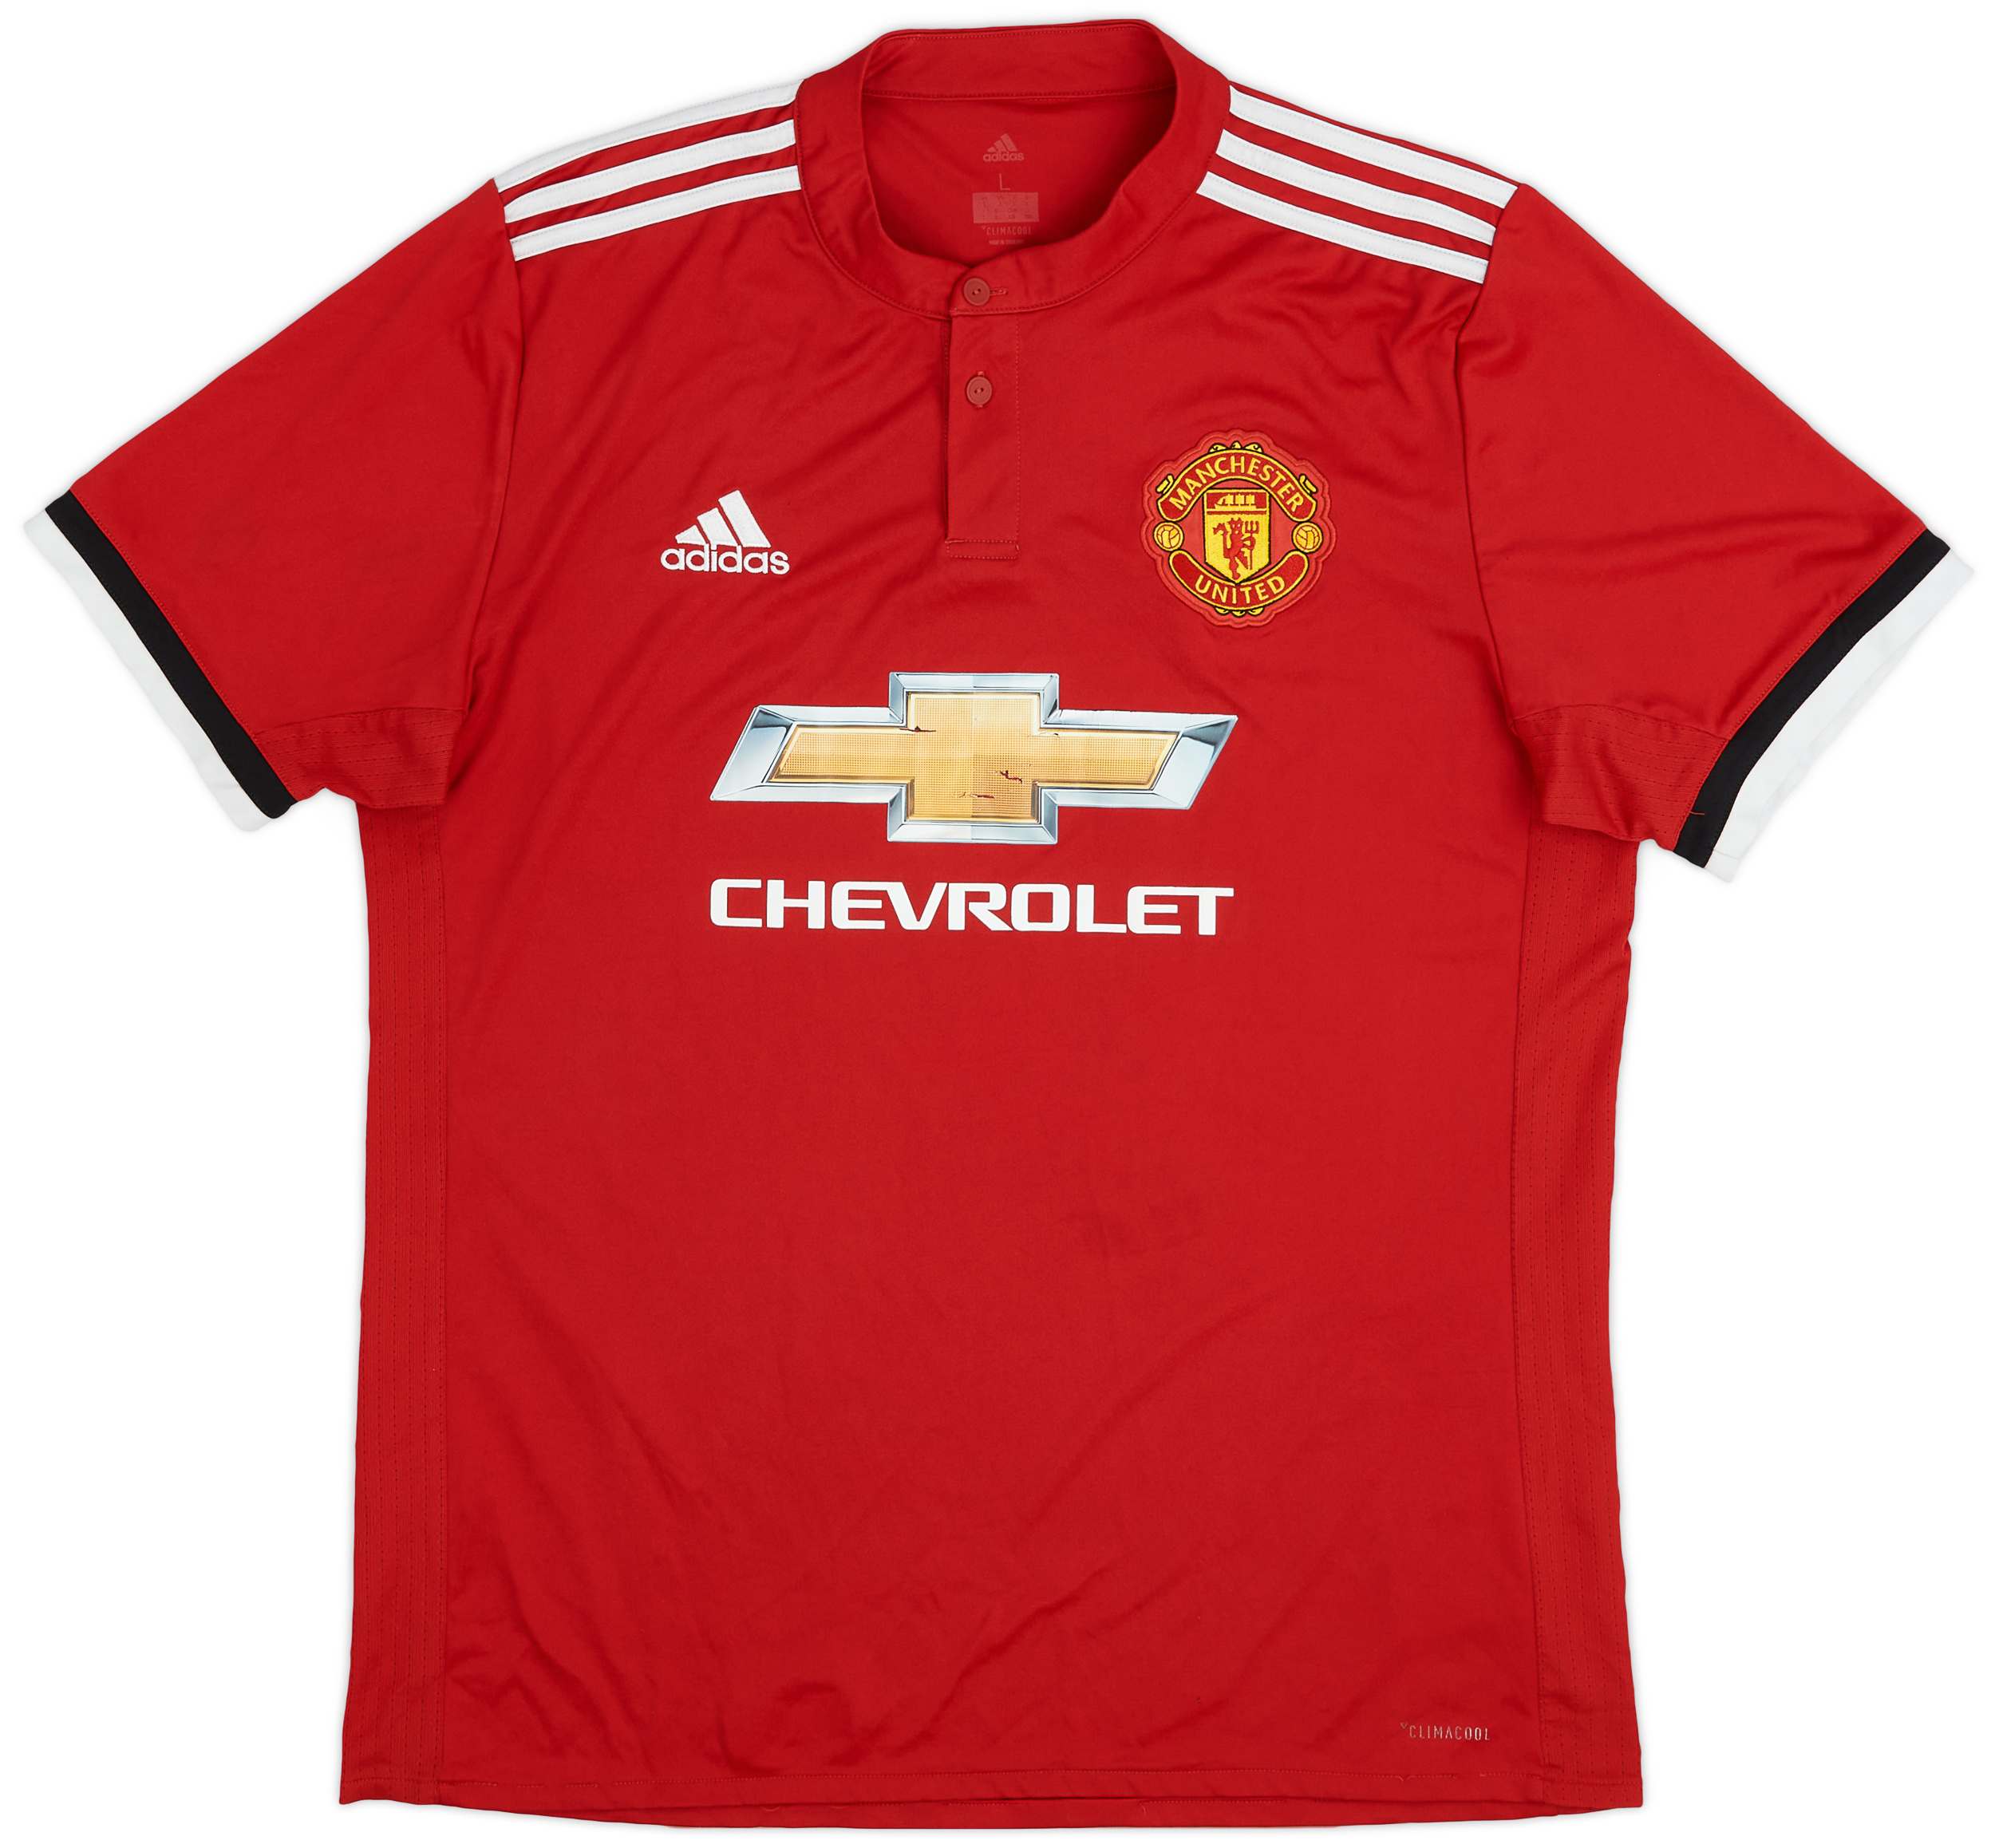 2017-18 Manchester United Home Shirt - 5/10 - (L)